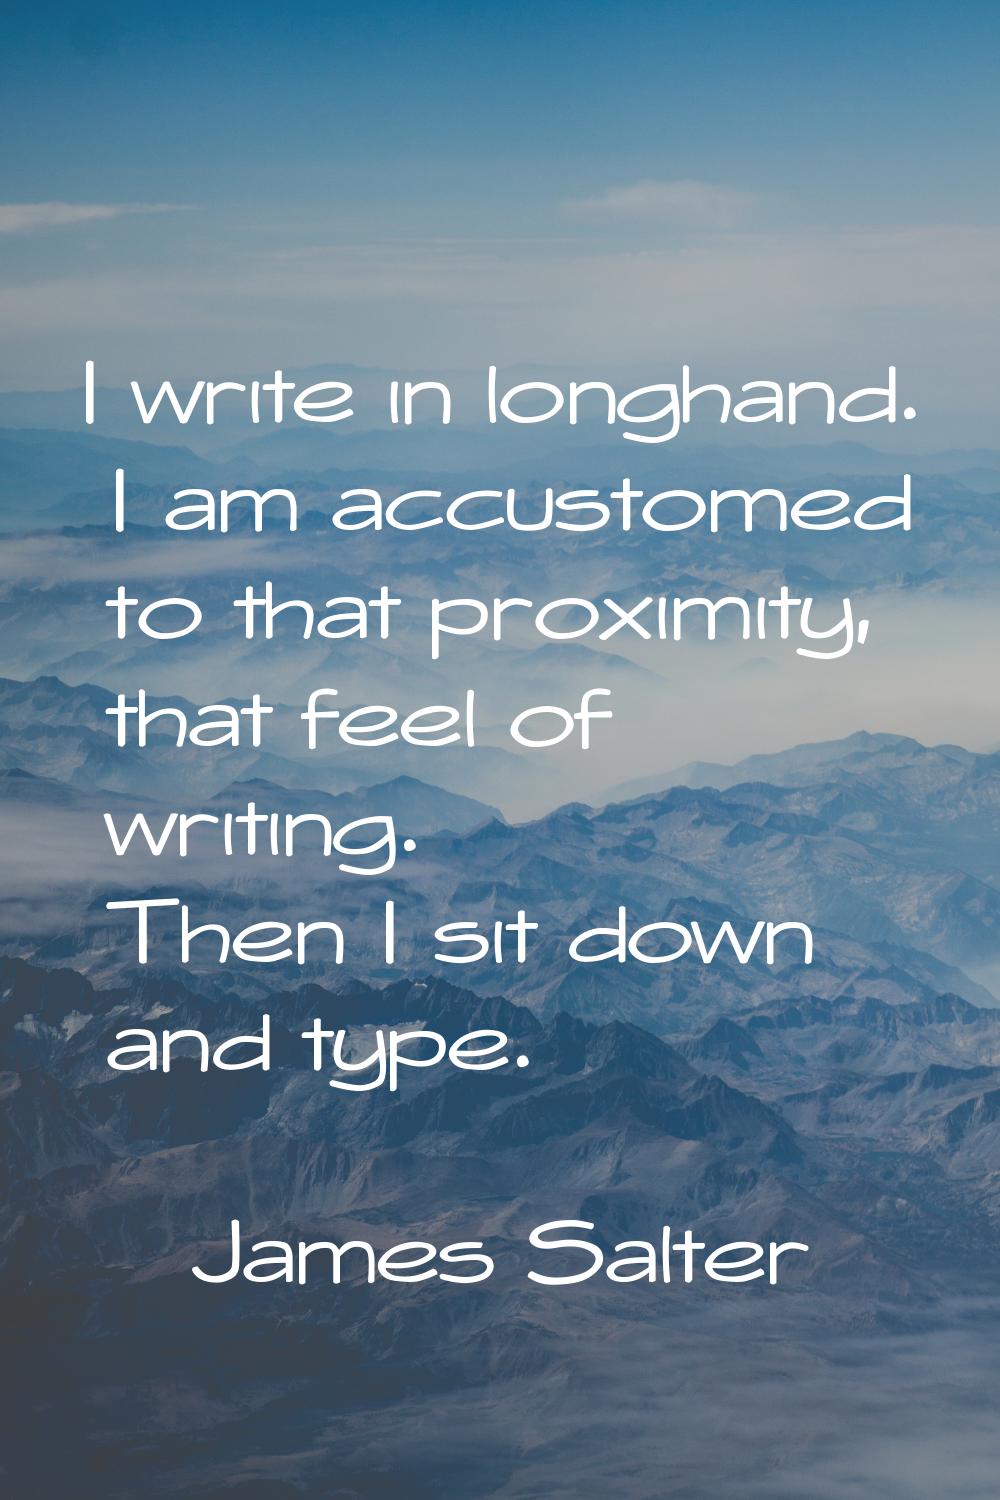 I write in longhand. I am accustomed to that proximity, that feel of writing. Then I sit down and t